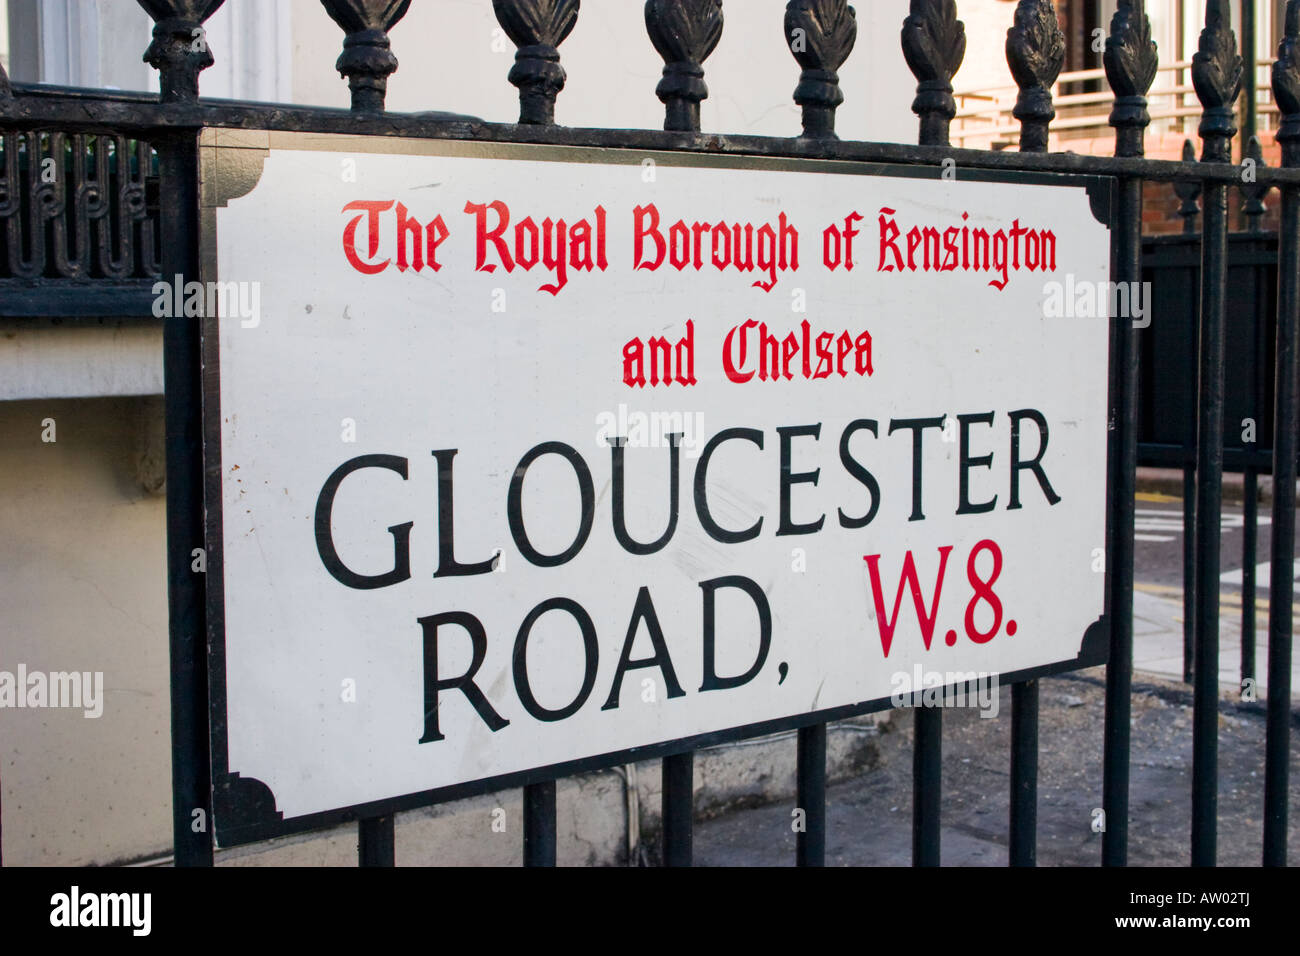 Gloucester Road London W8 street name sign Stock Photo